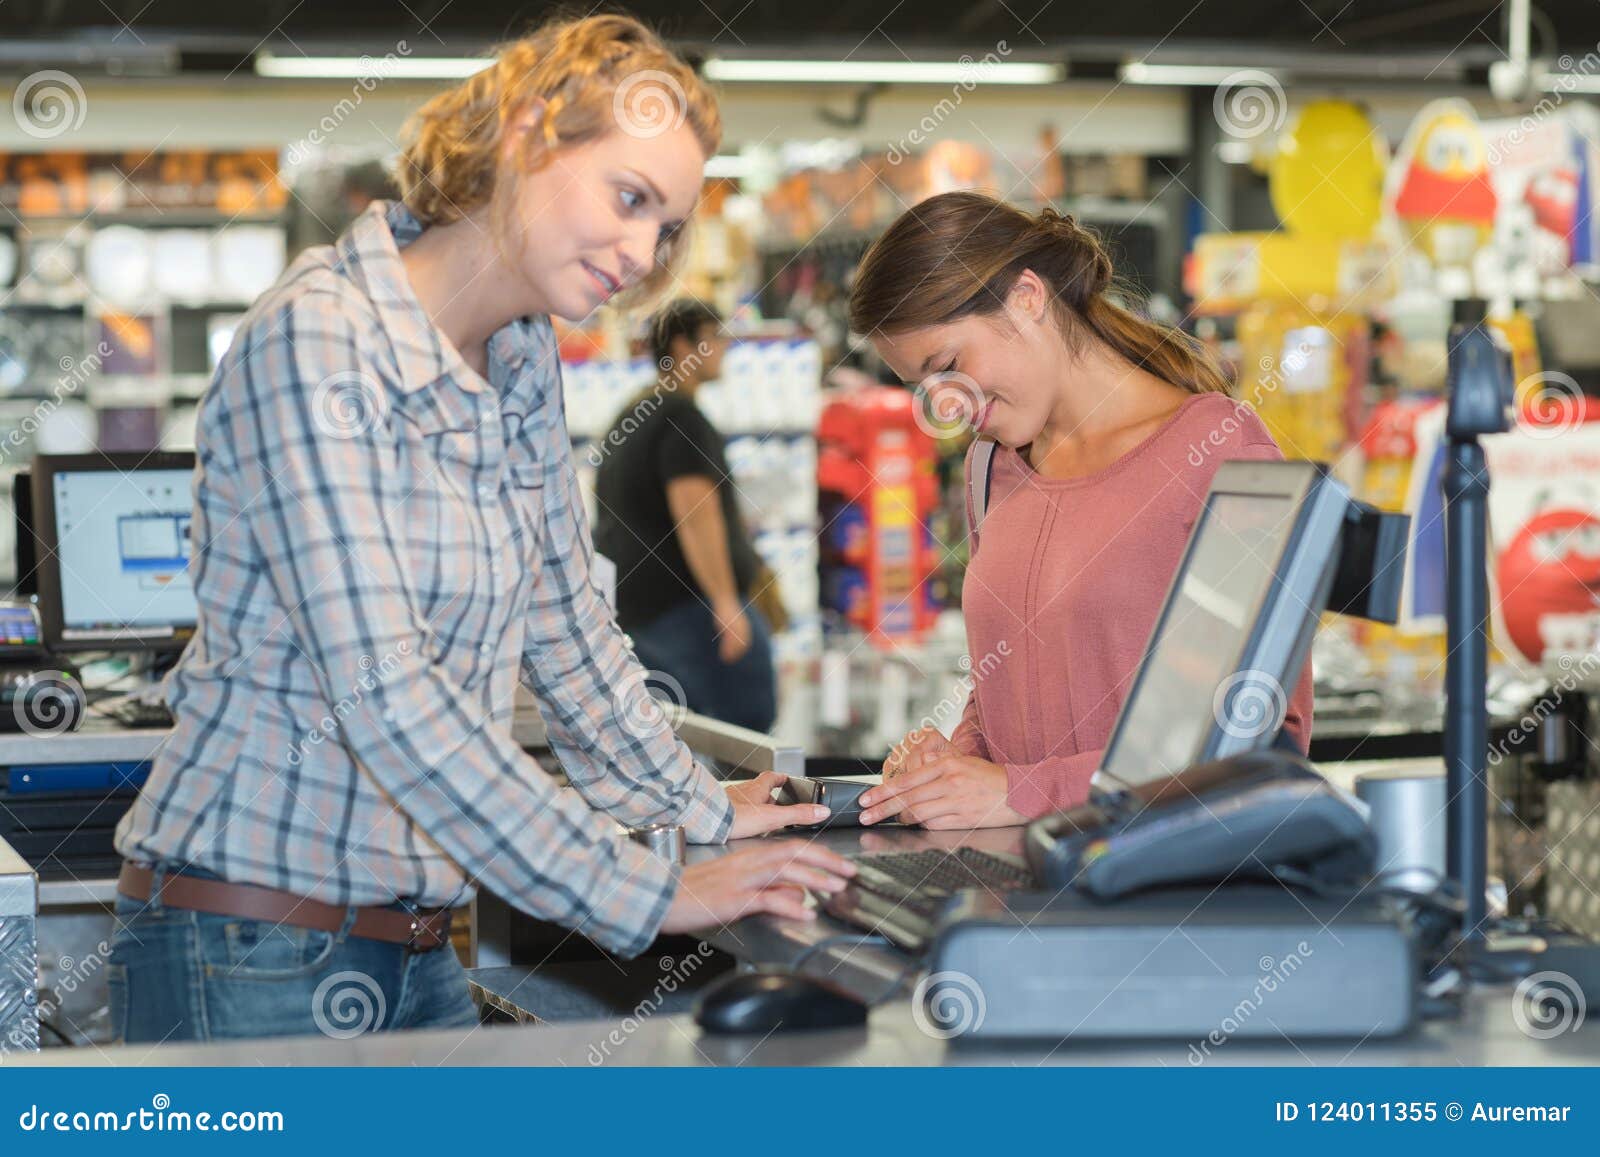 Female Customer Paying At Cash Desk With Terminal In Supermarket